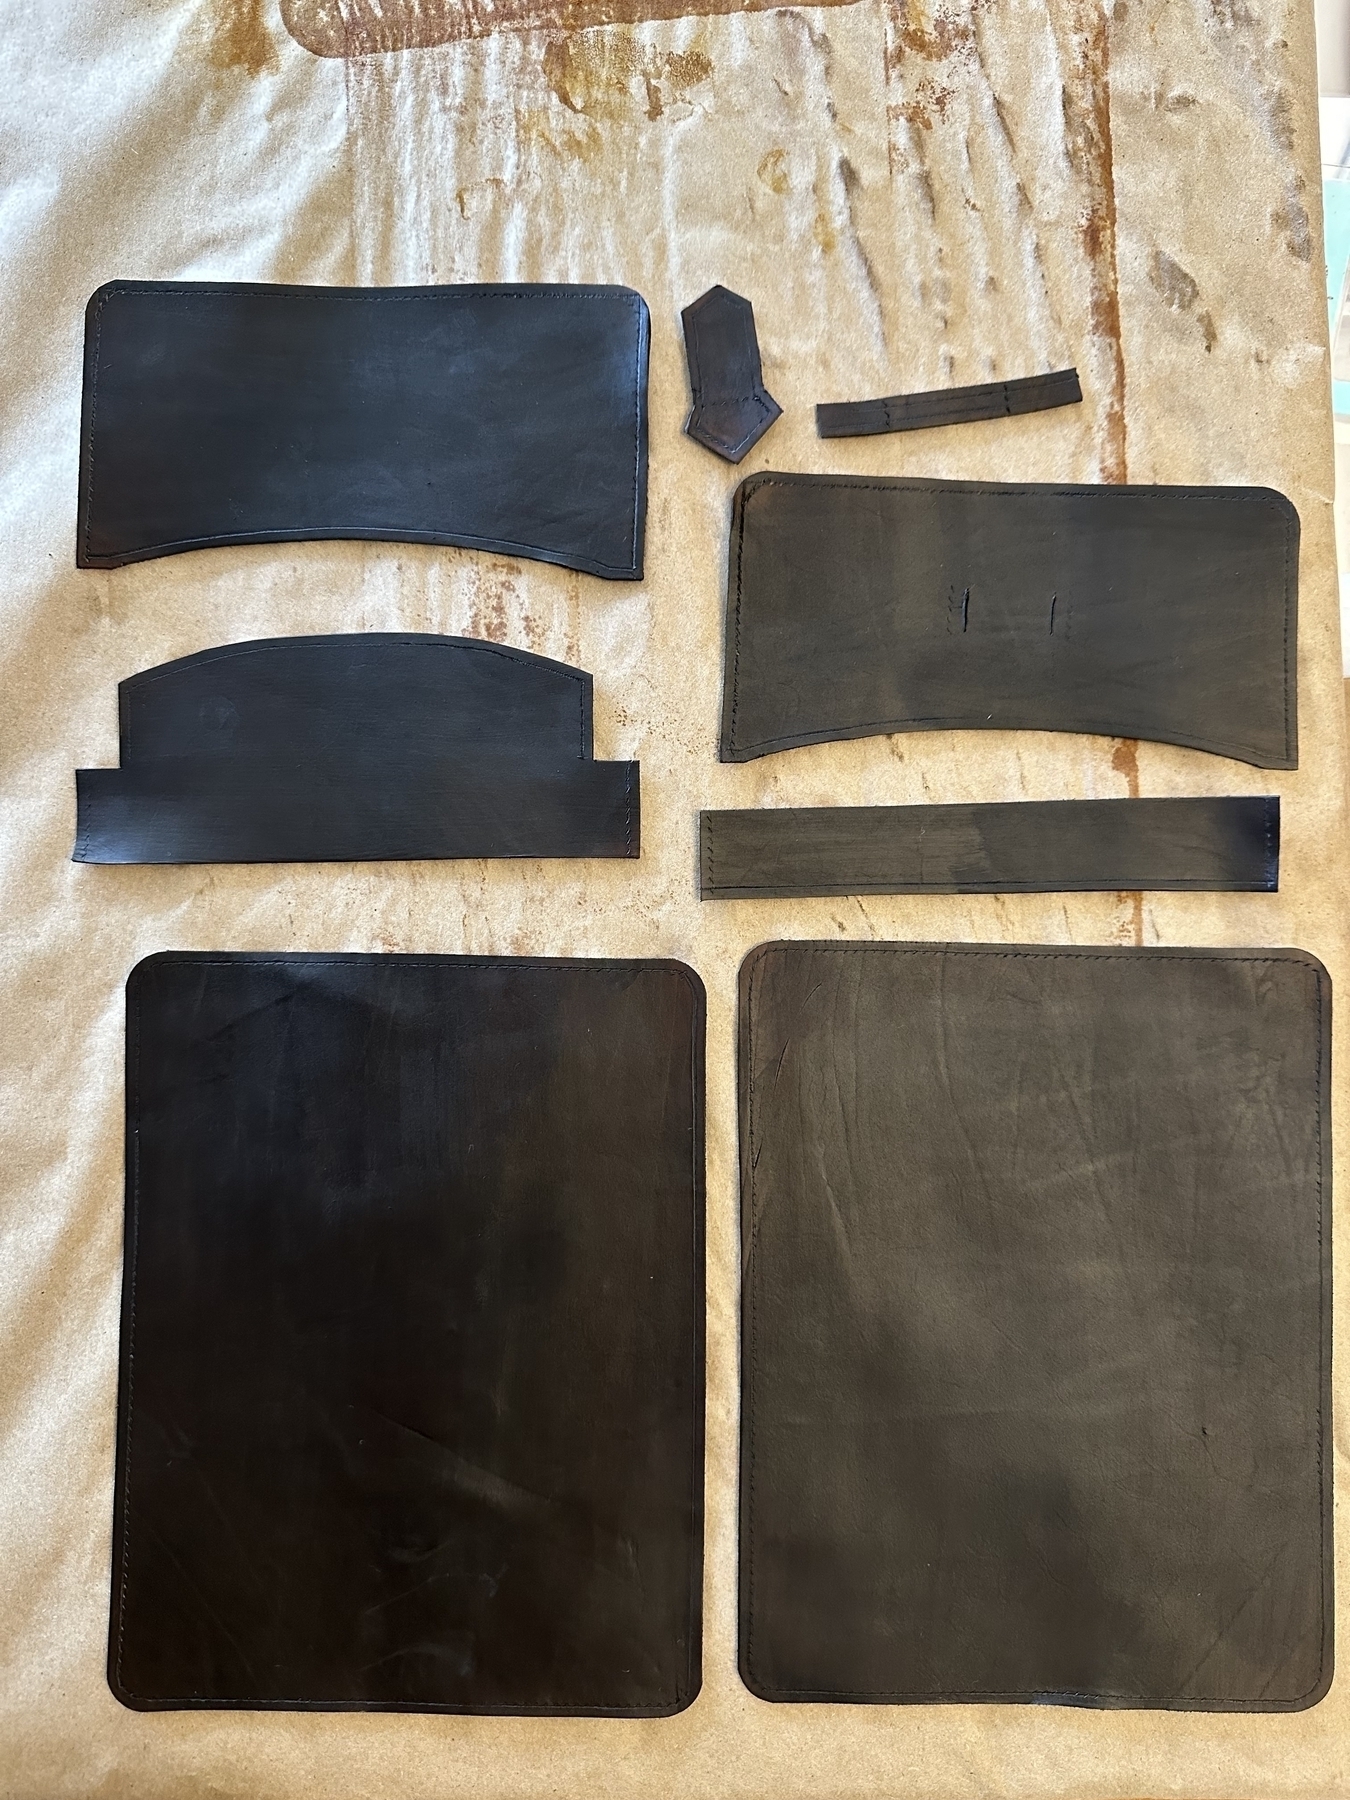 dyed leather, chocolate leather dye, various parts of a leather wallet